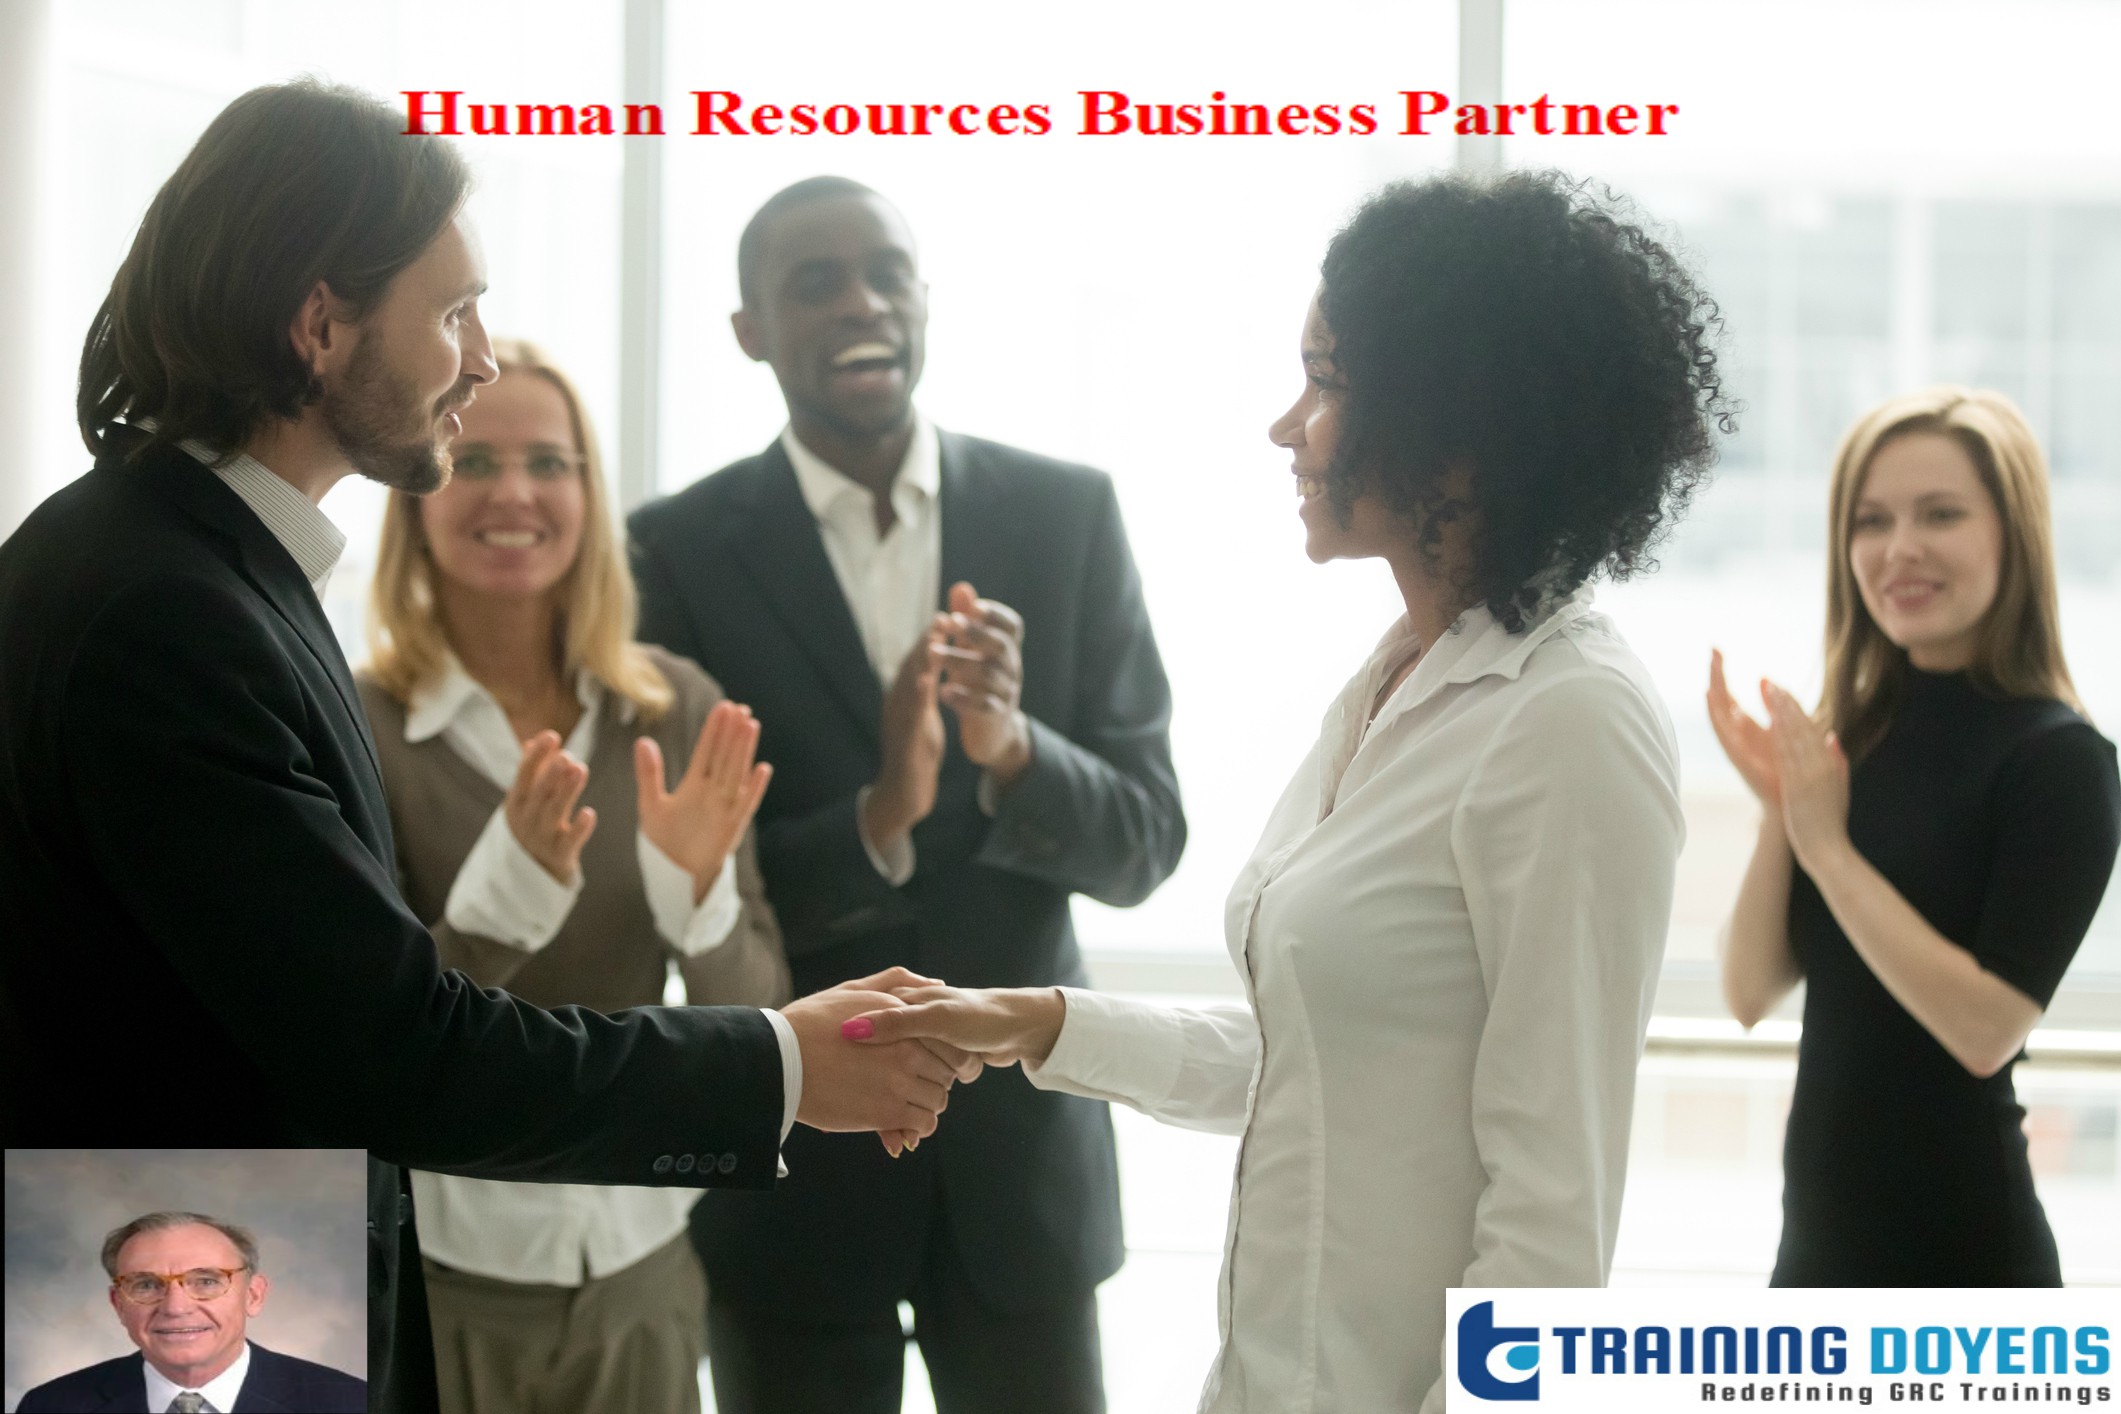 Being Seen as a Human Resource Strategic Business Partner, Aurora, Colorado, United States